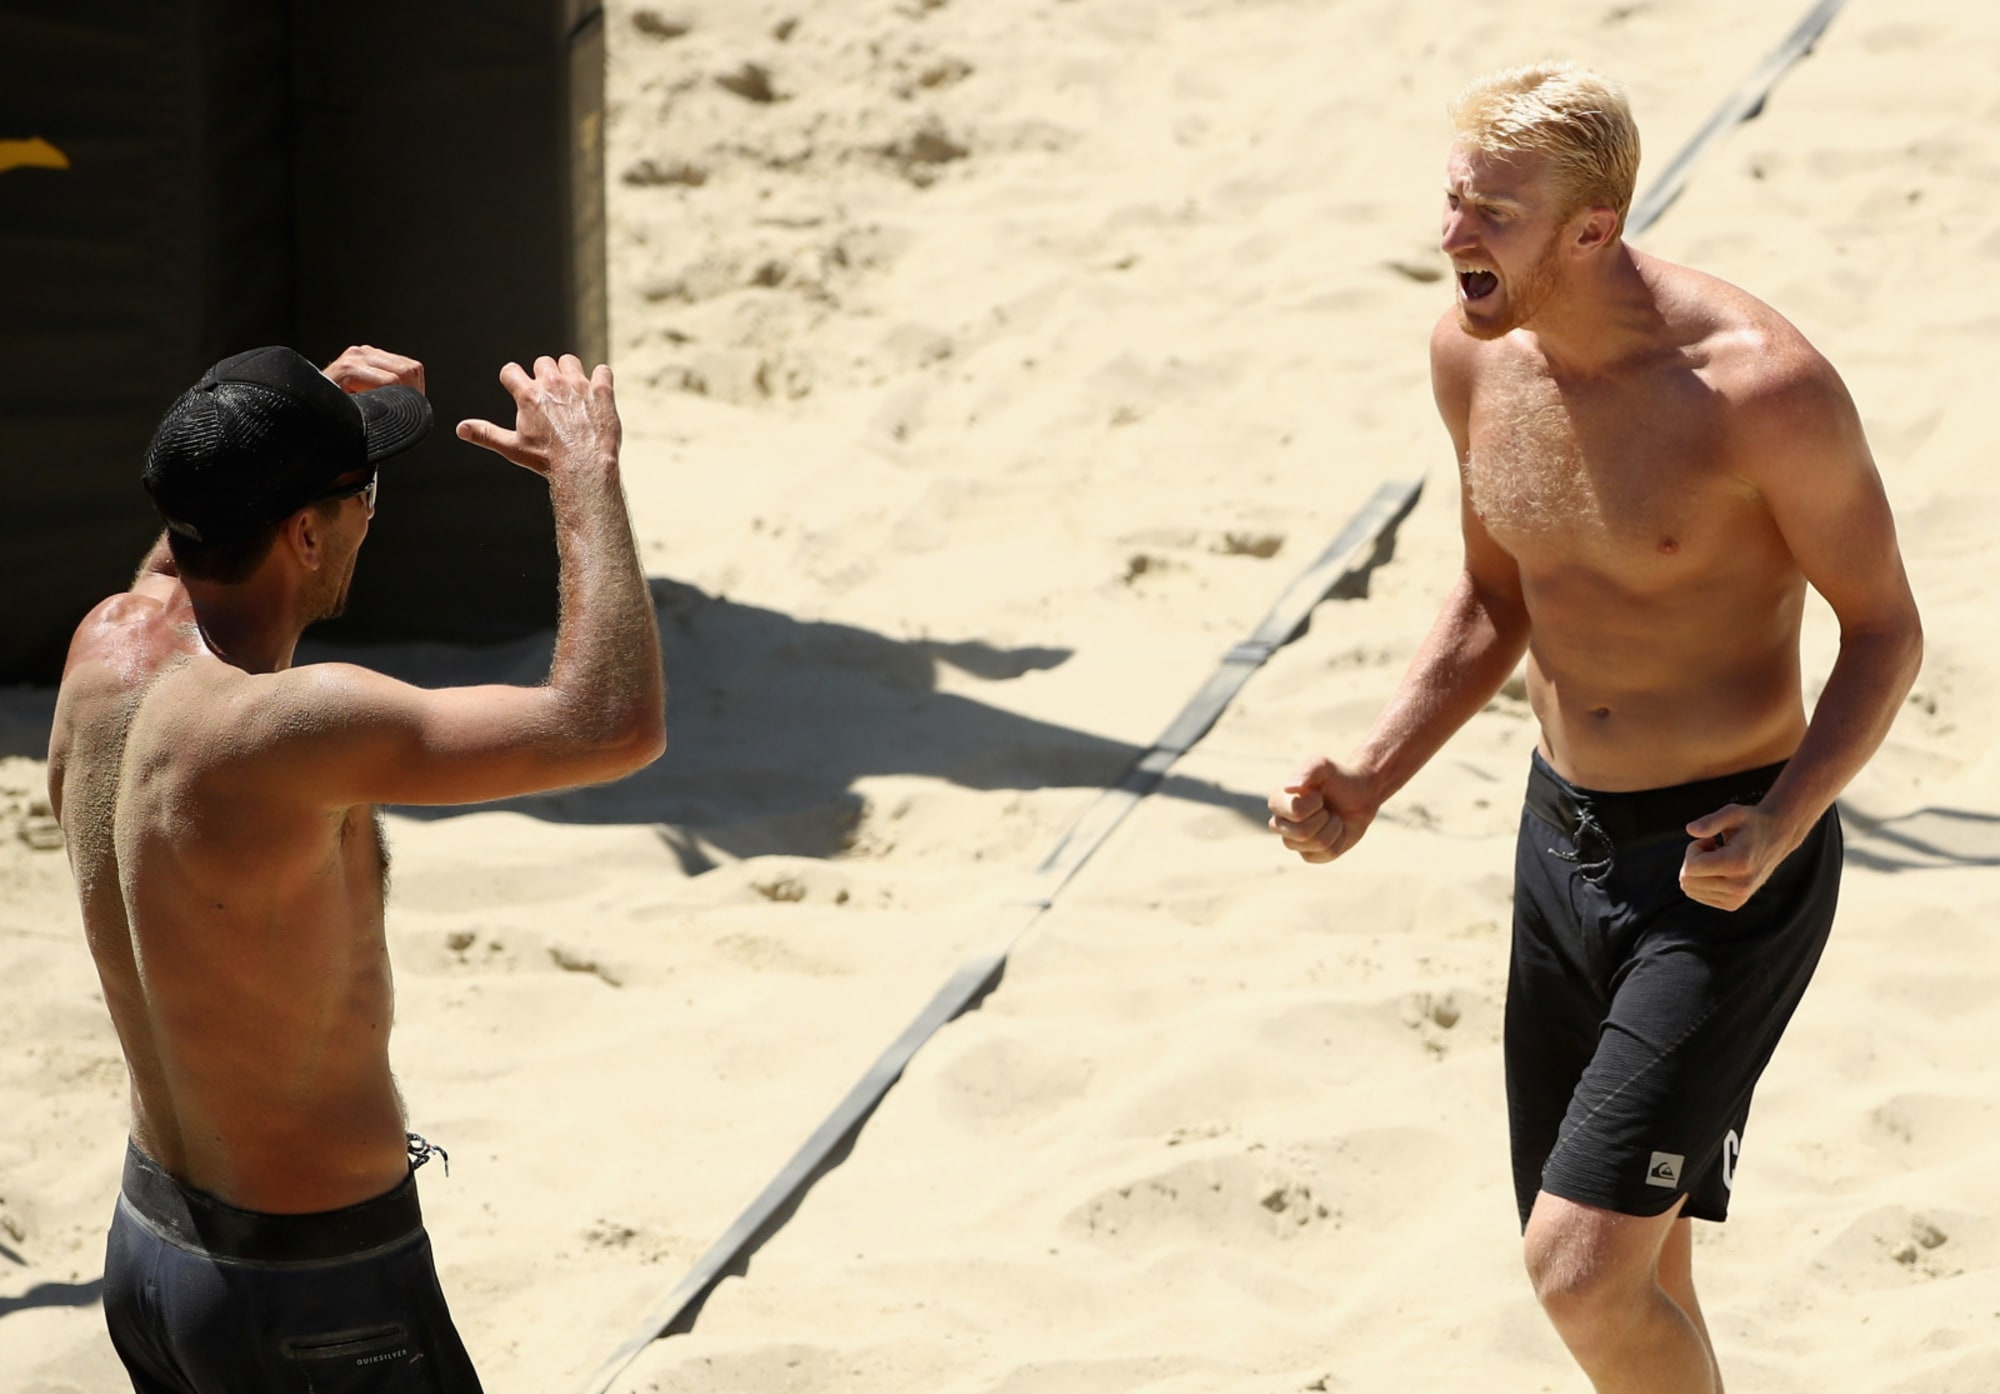 Former Wildcat Star Chase Budinger Places Second At Avp Tournament